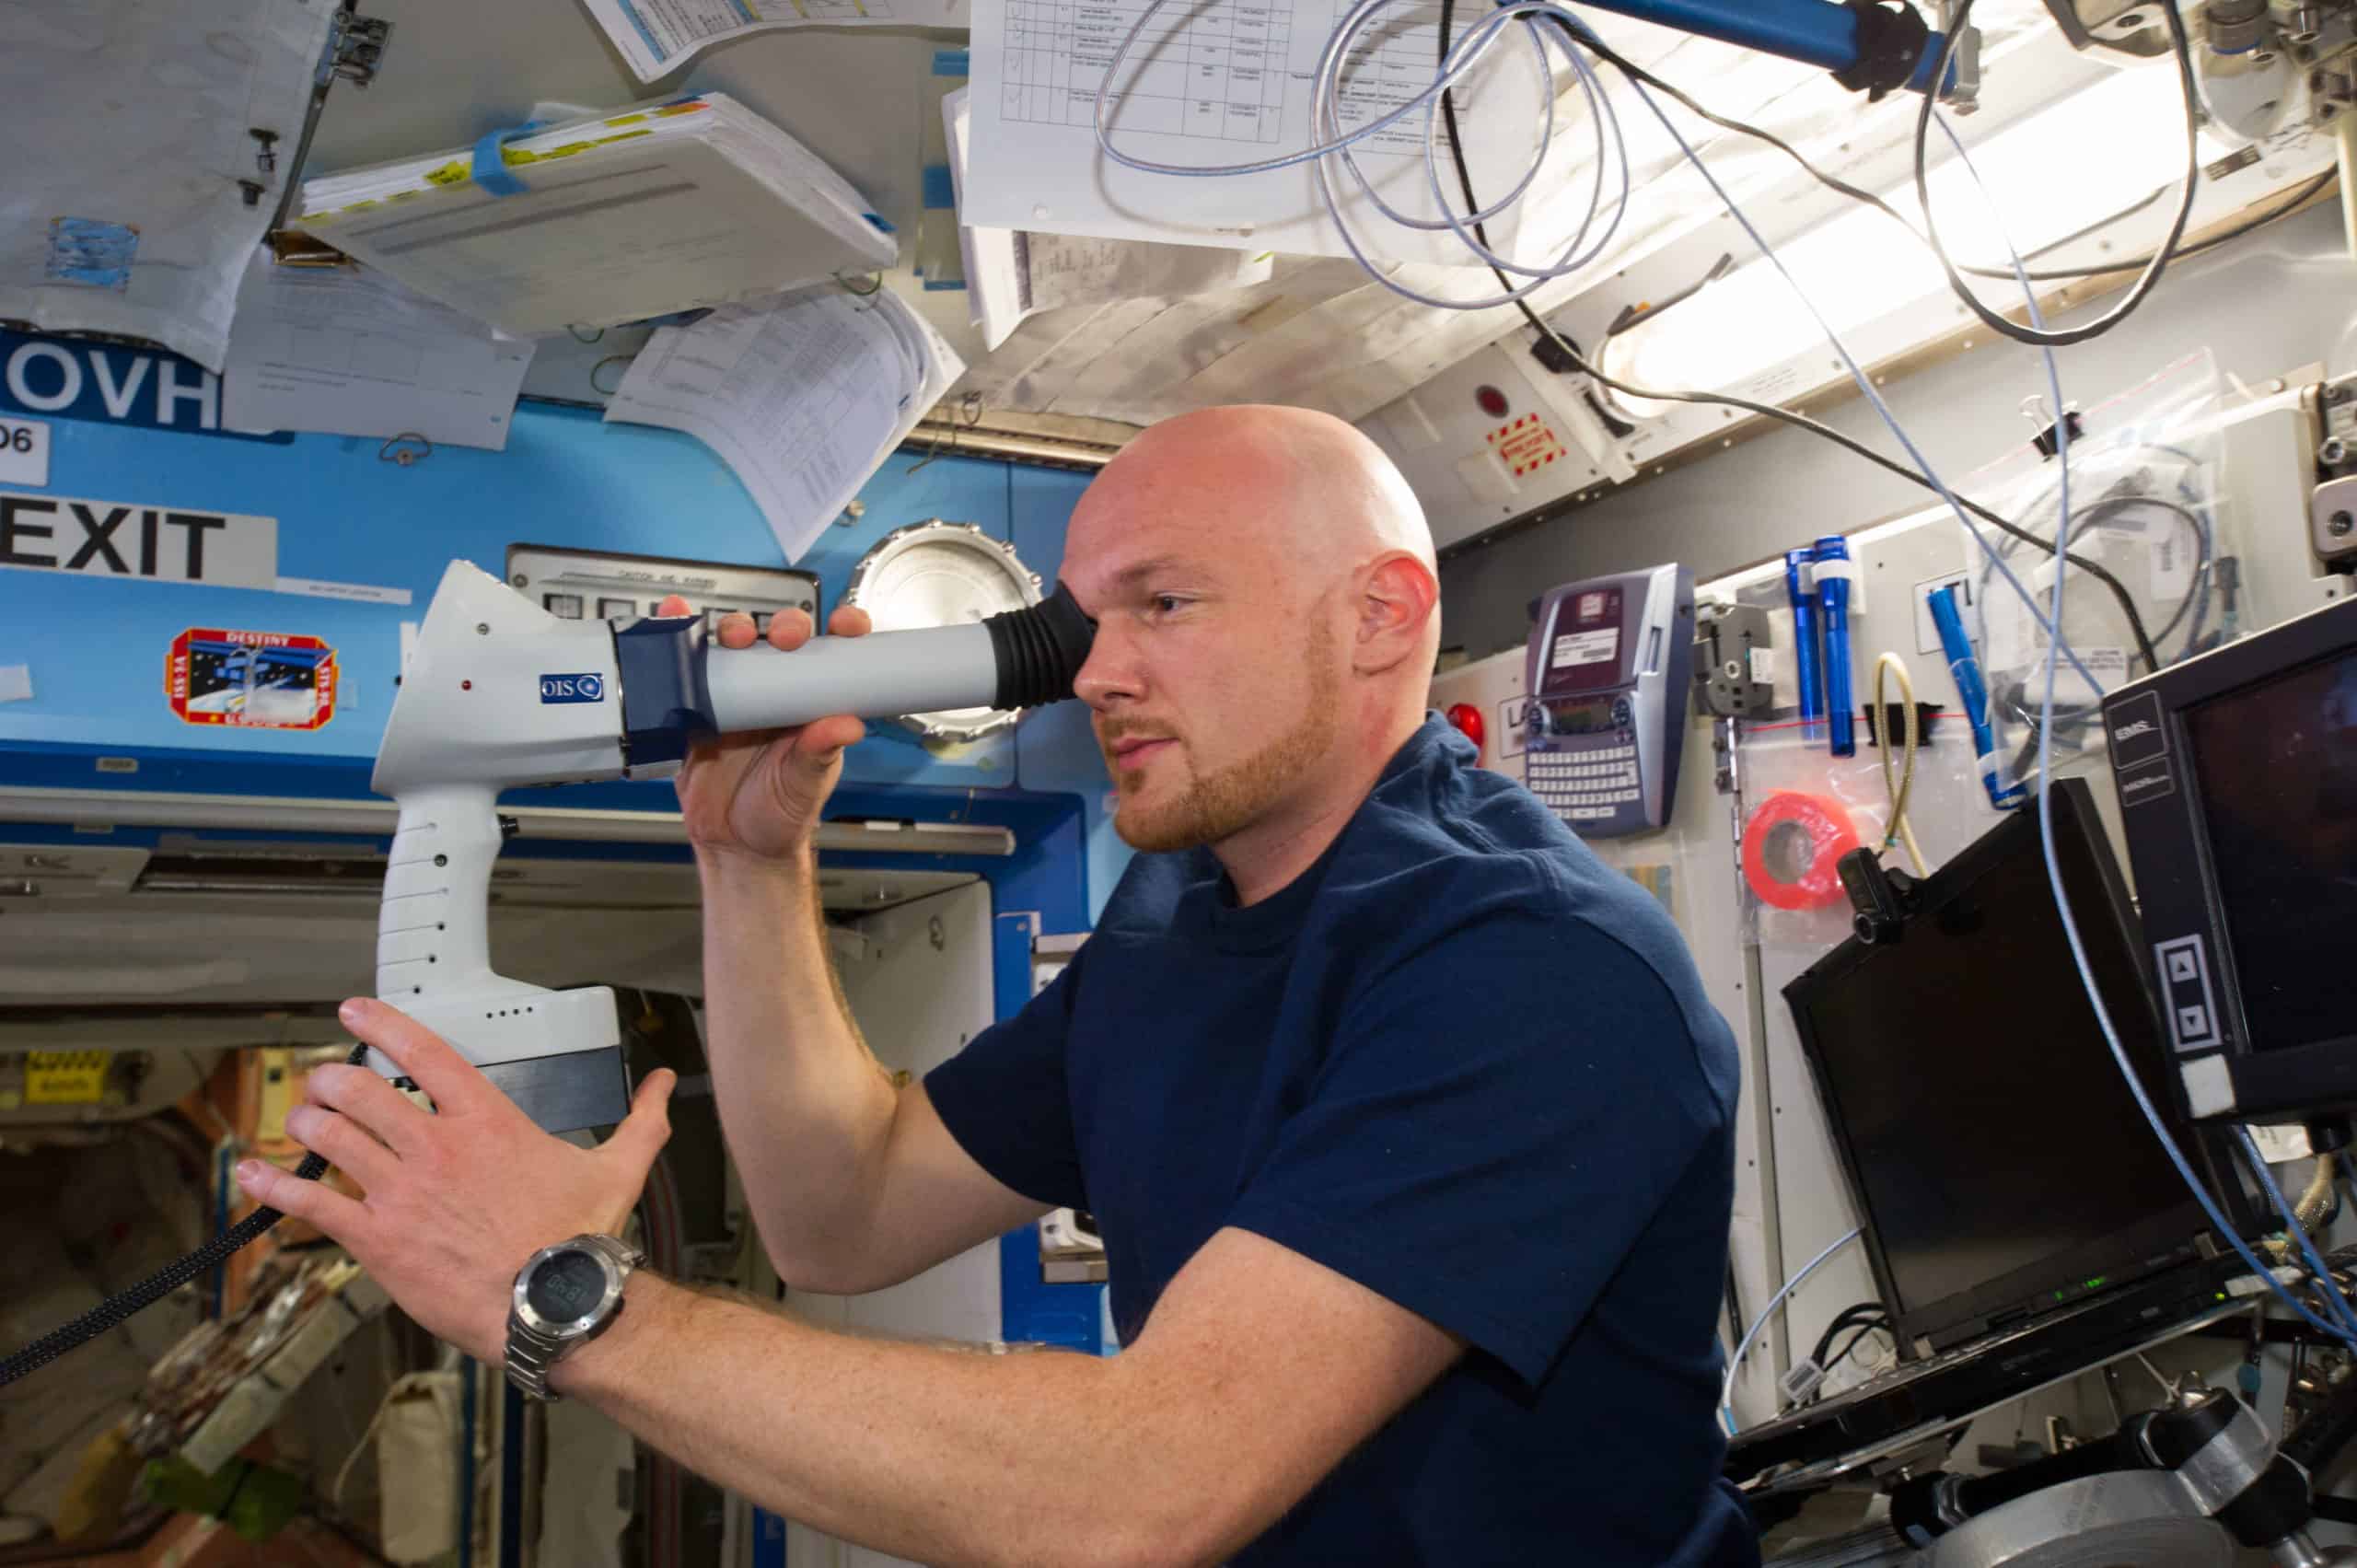 Being In Space Alters Human Eyes